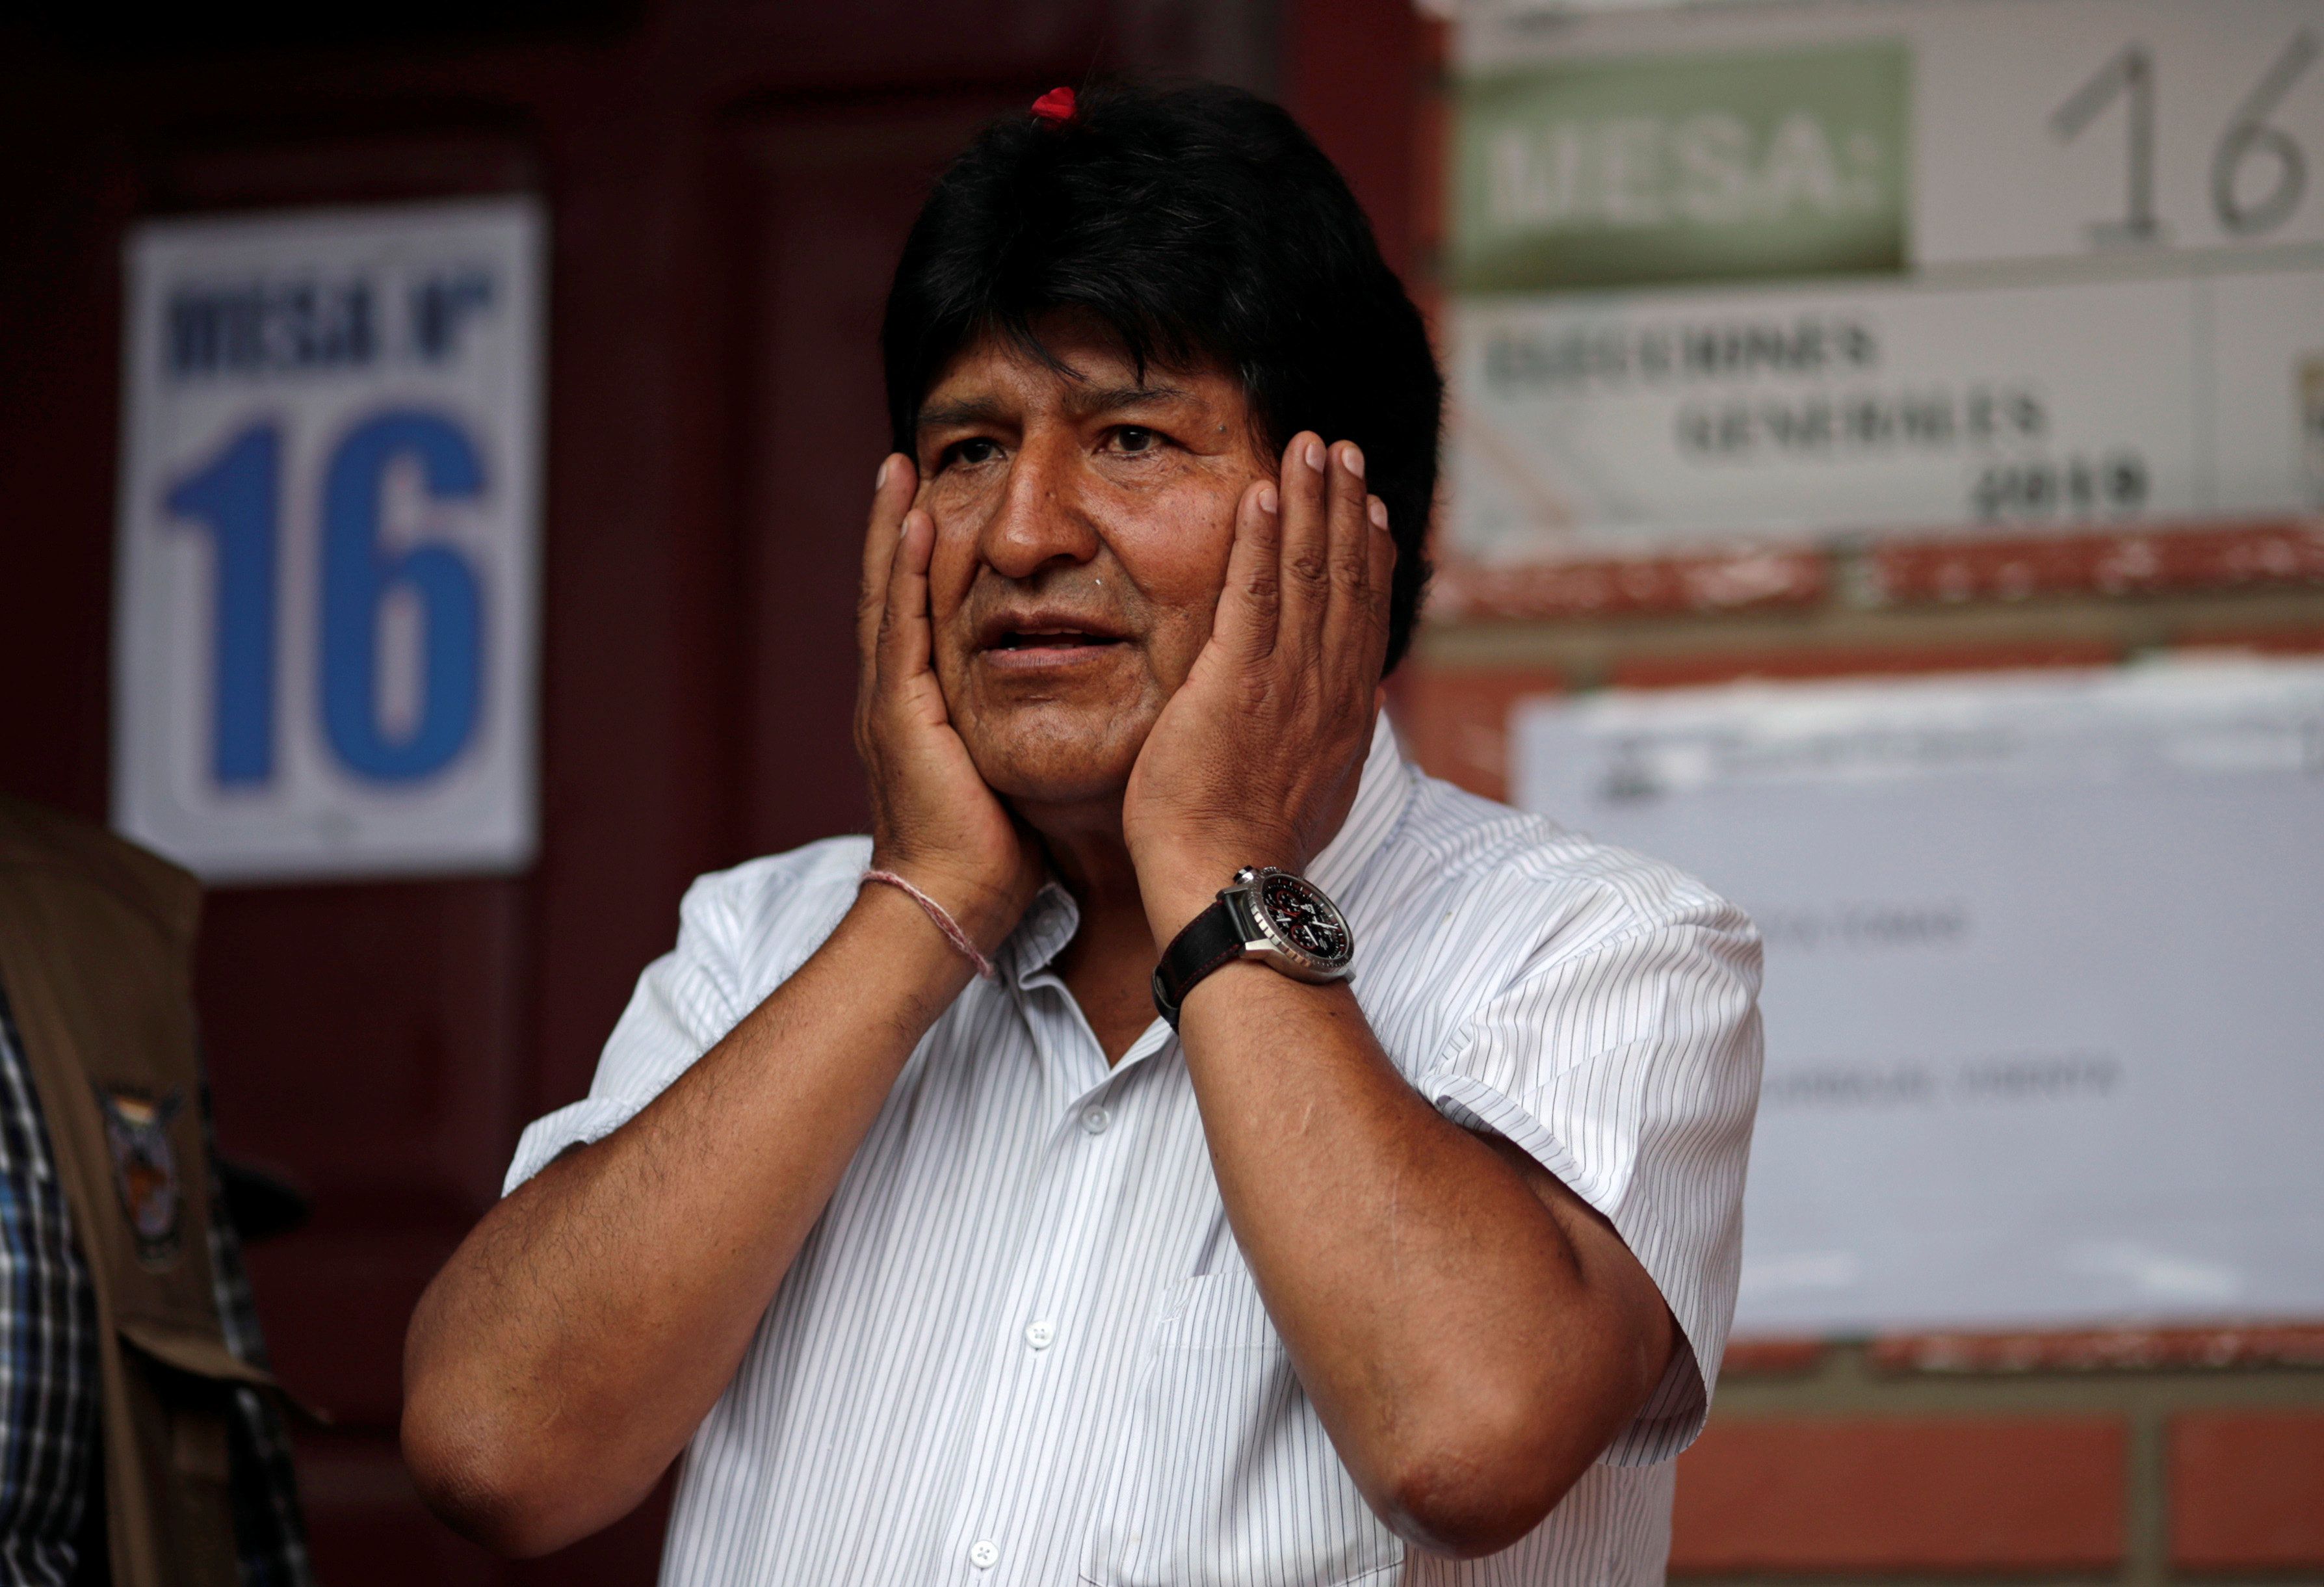 Bolivia: The Morales of the story